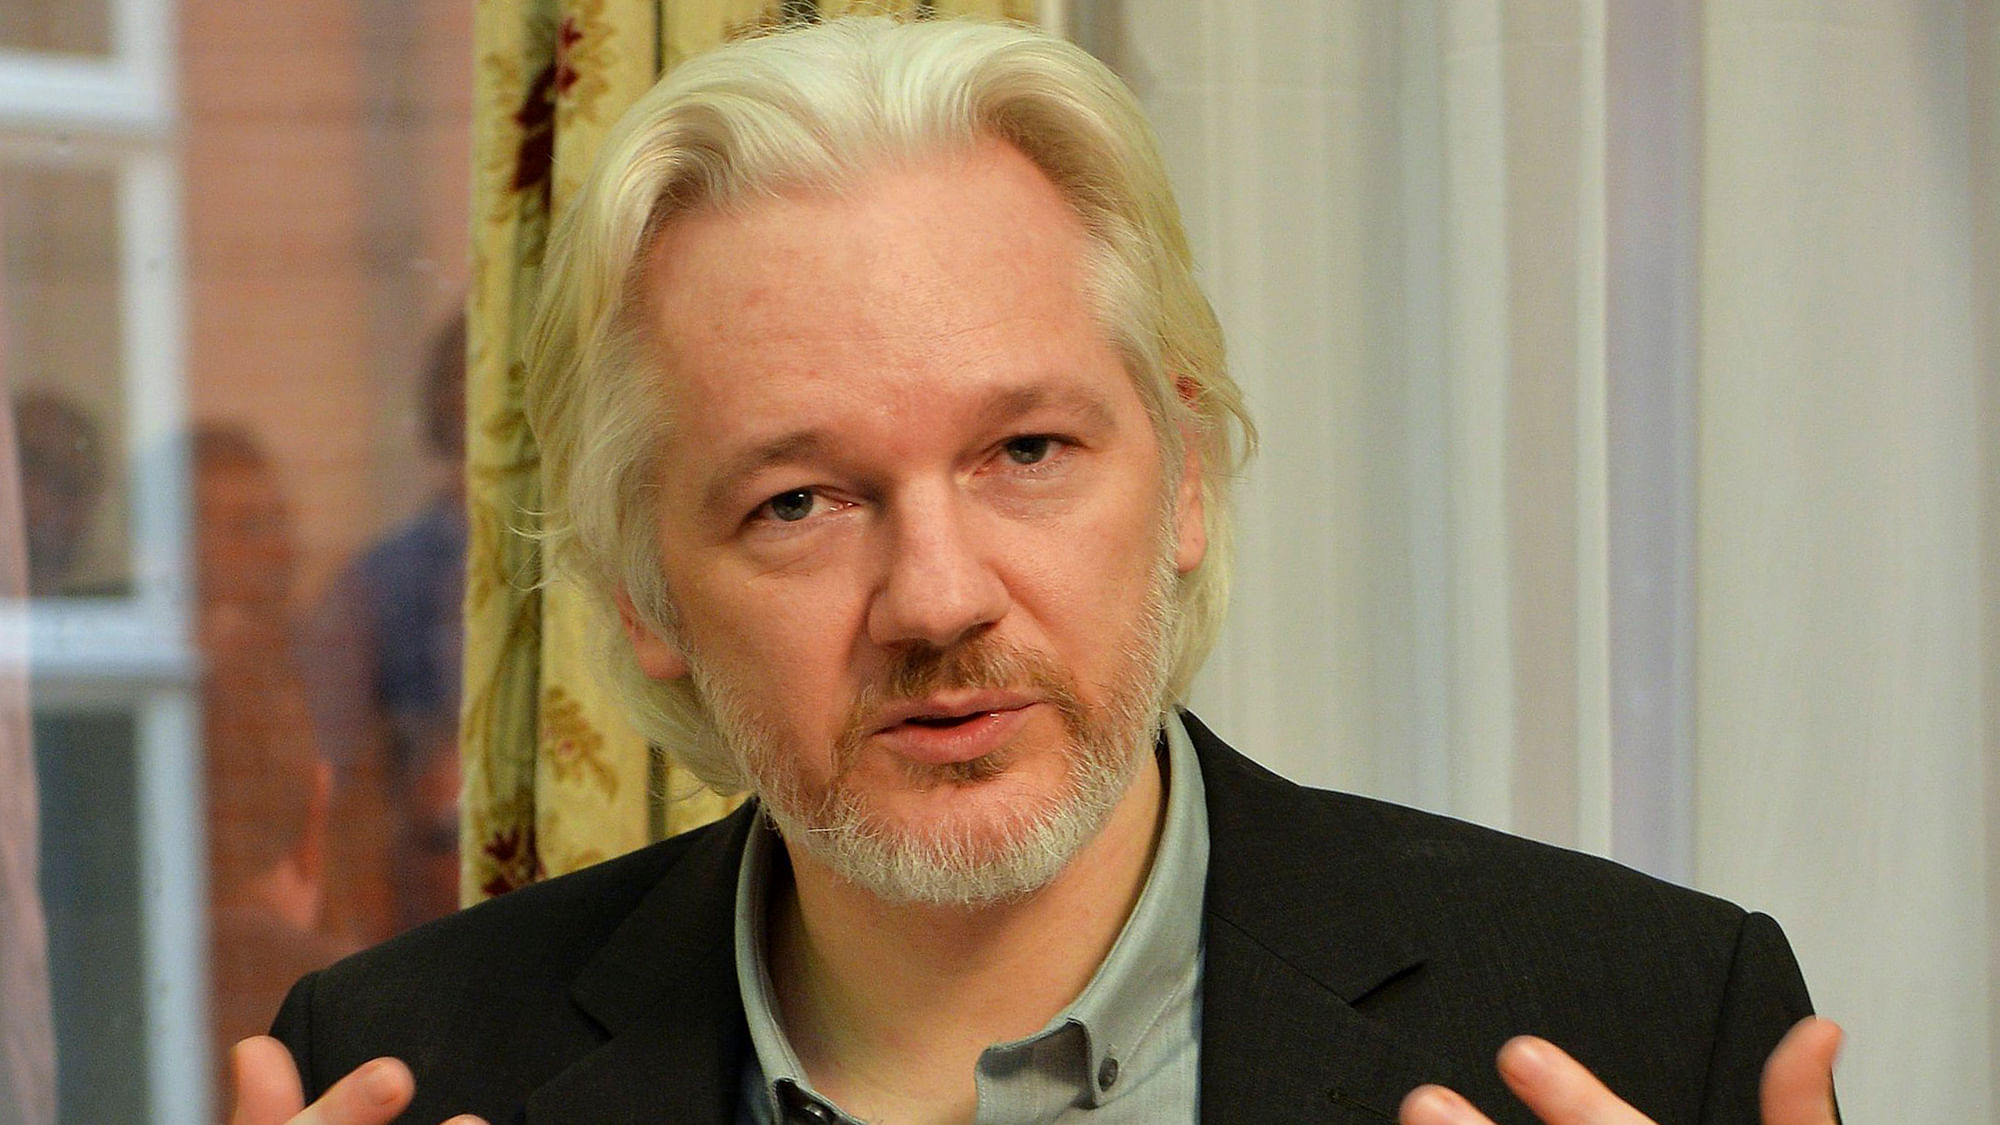 Julian Assange has been holed up in Ecuador’s embassy in London since 2012. (Photo: Reuters)